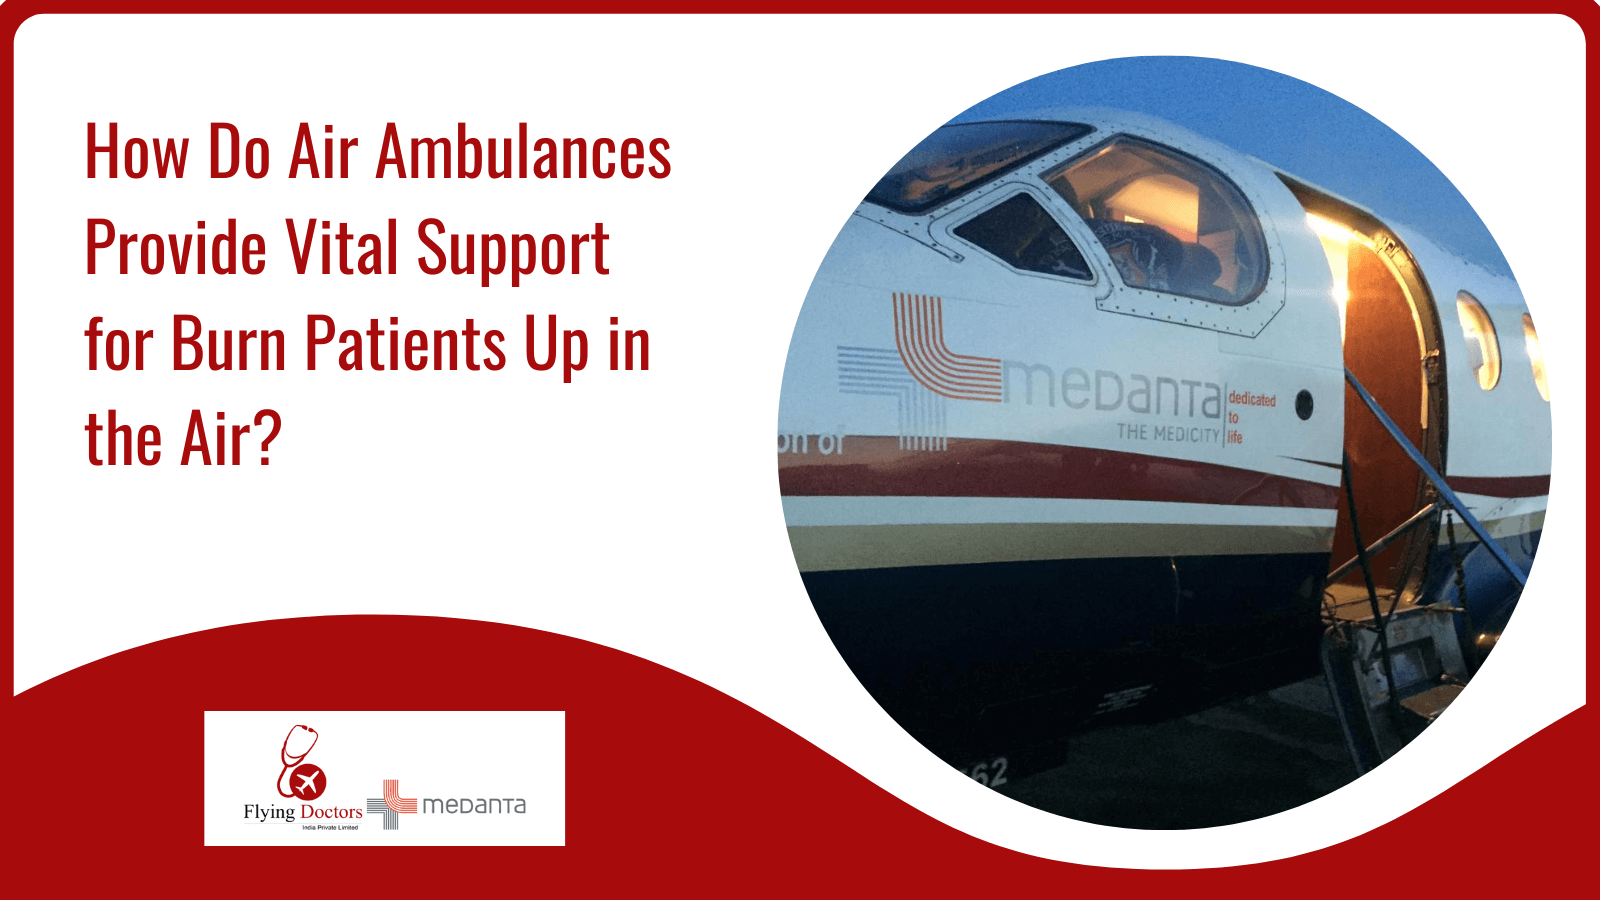 How Do Air Ambulances Provide Vital Support for Burn Patients Up in the Air?